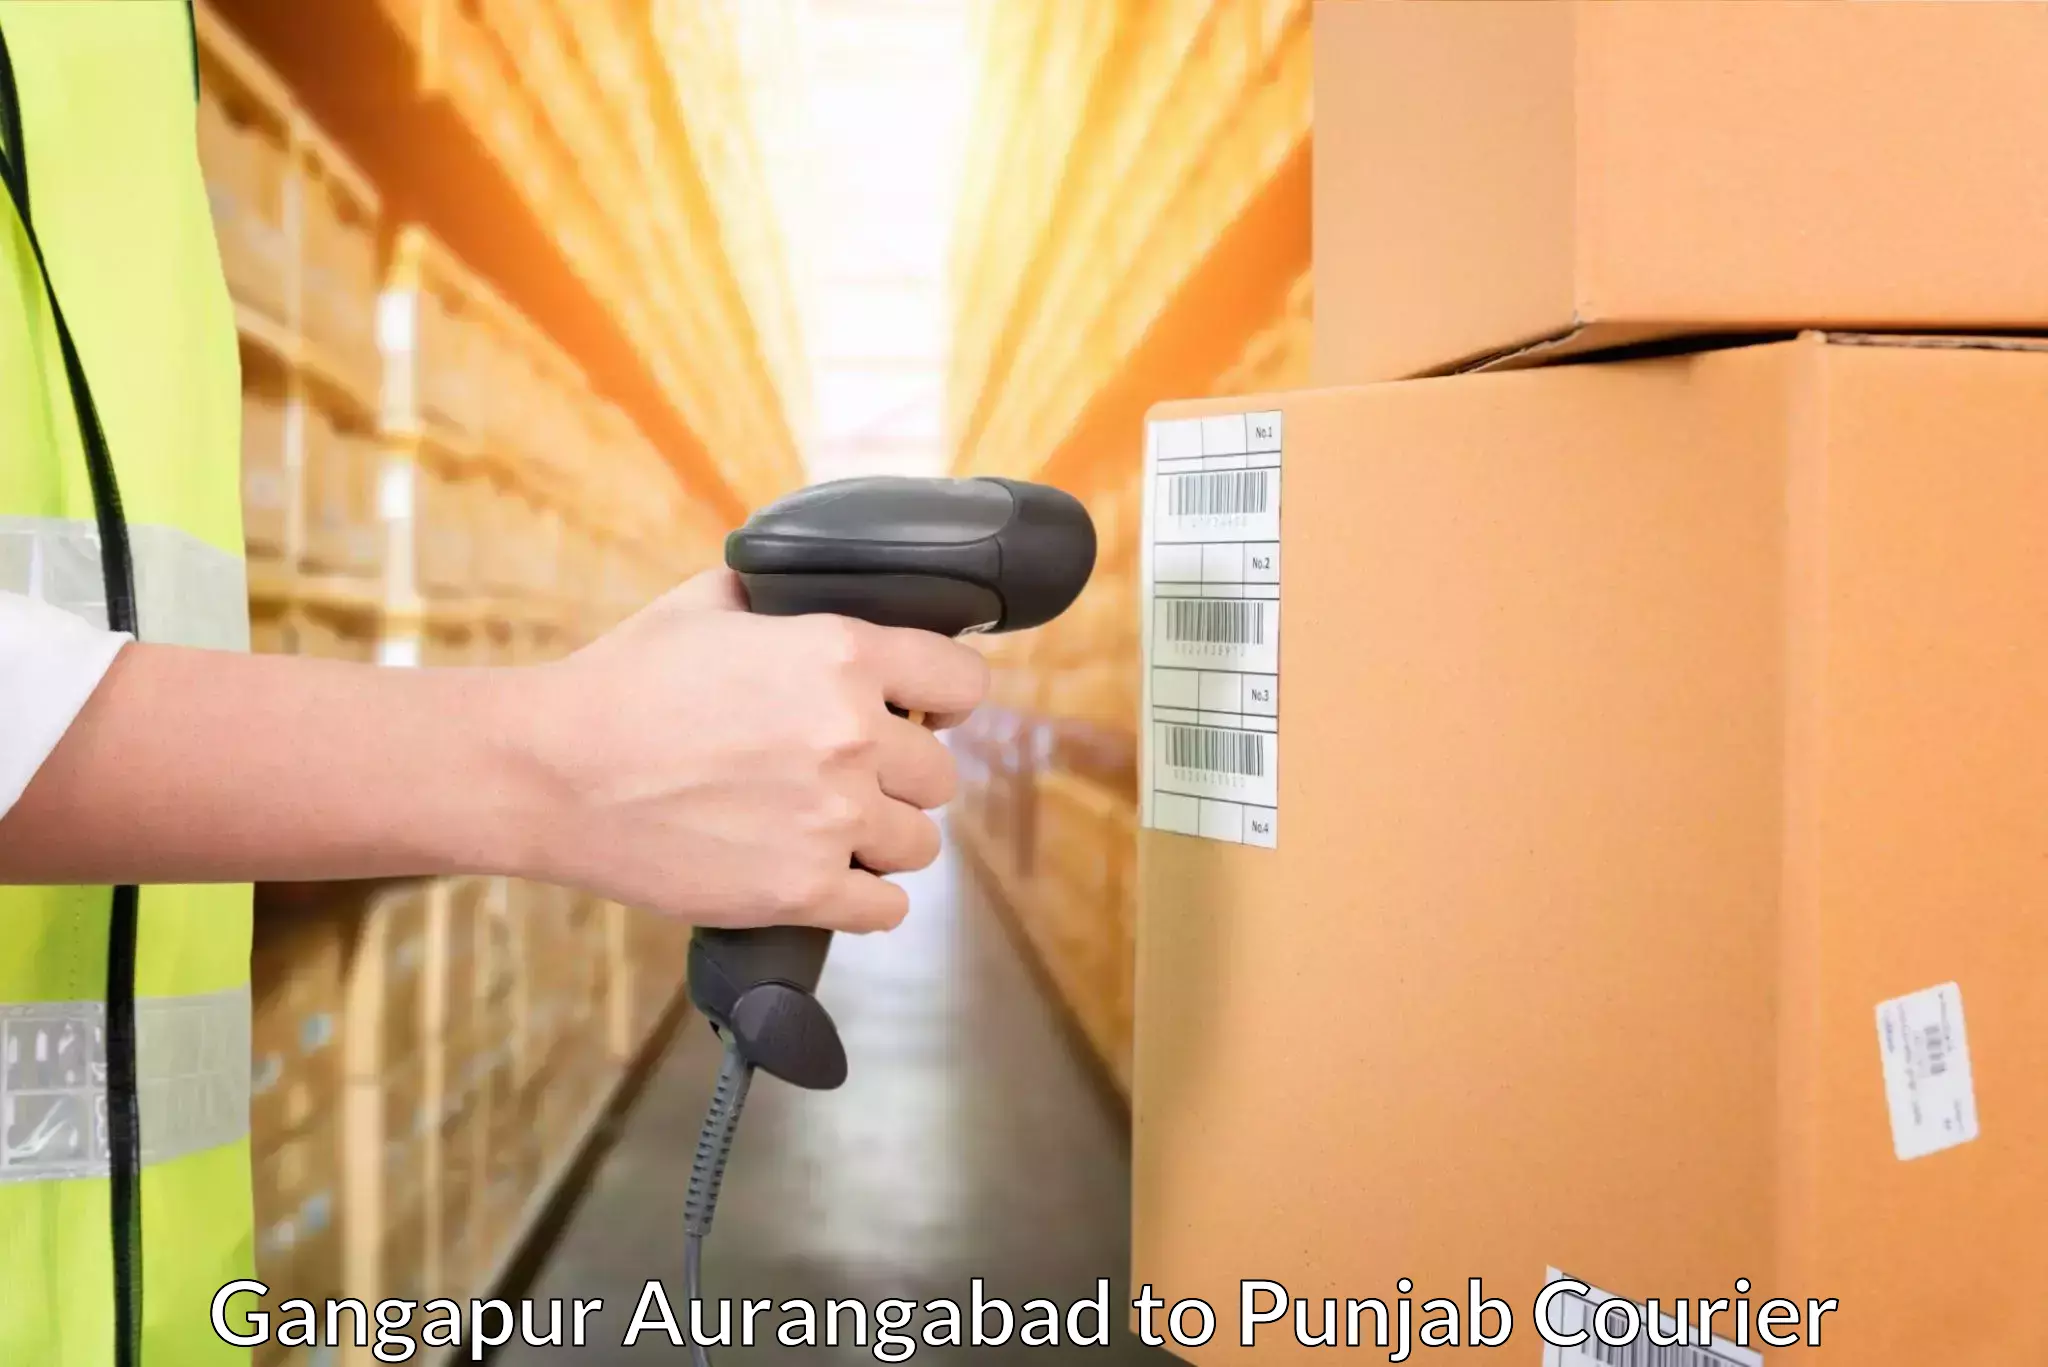 Customer-oriented courier services Gangapur Aurangabad to Pathankot